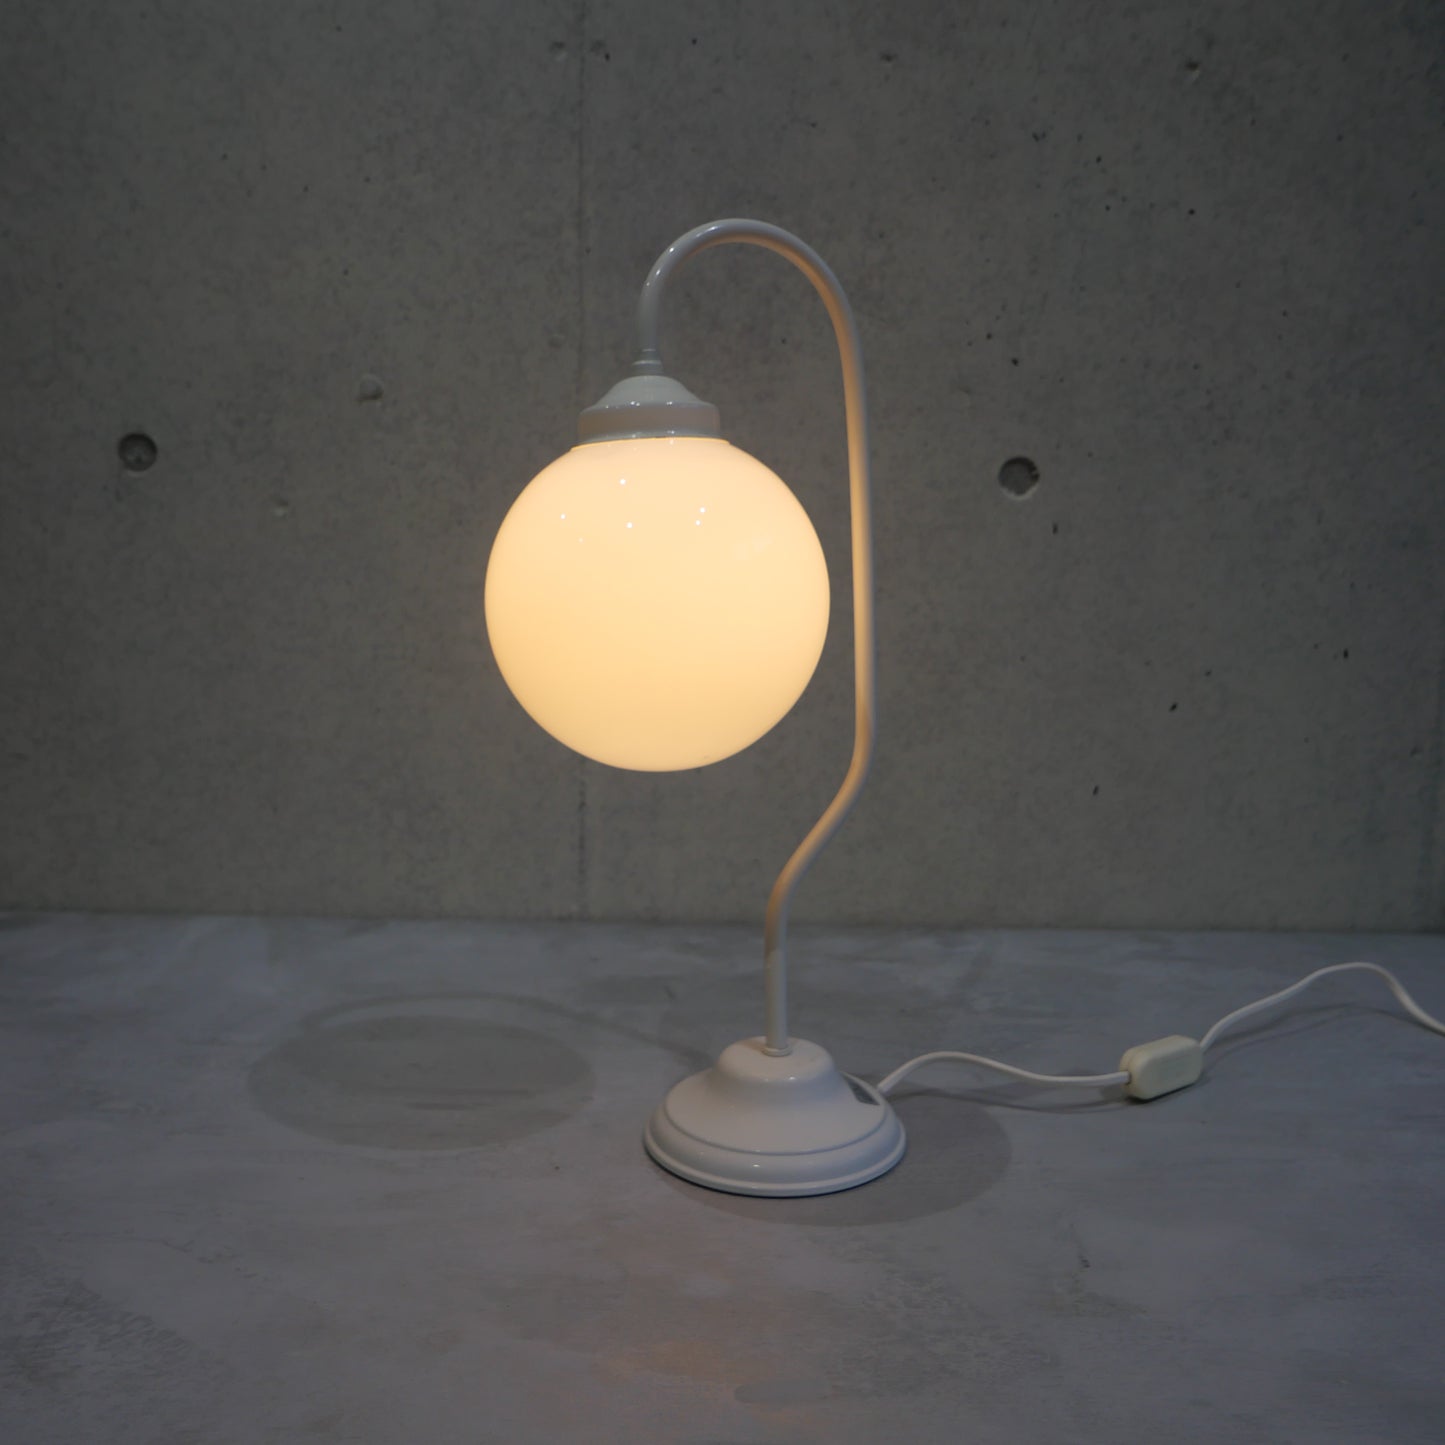 Vintage Iconic Table Lamp from Herda Amsterdam 1970s